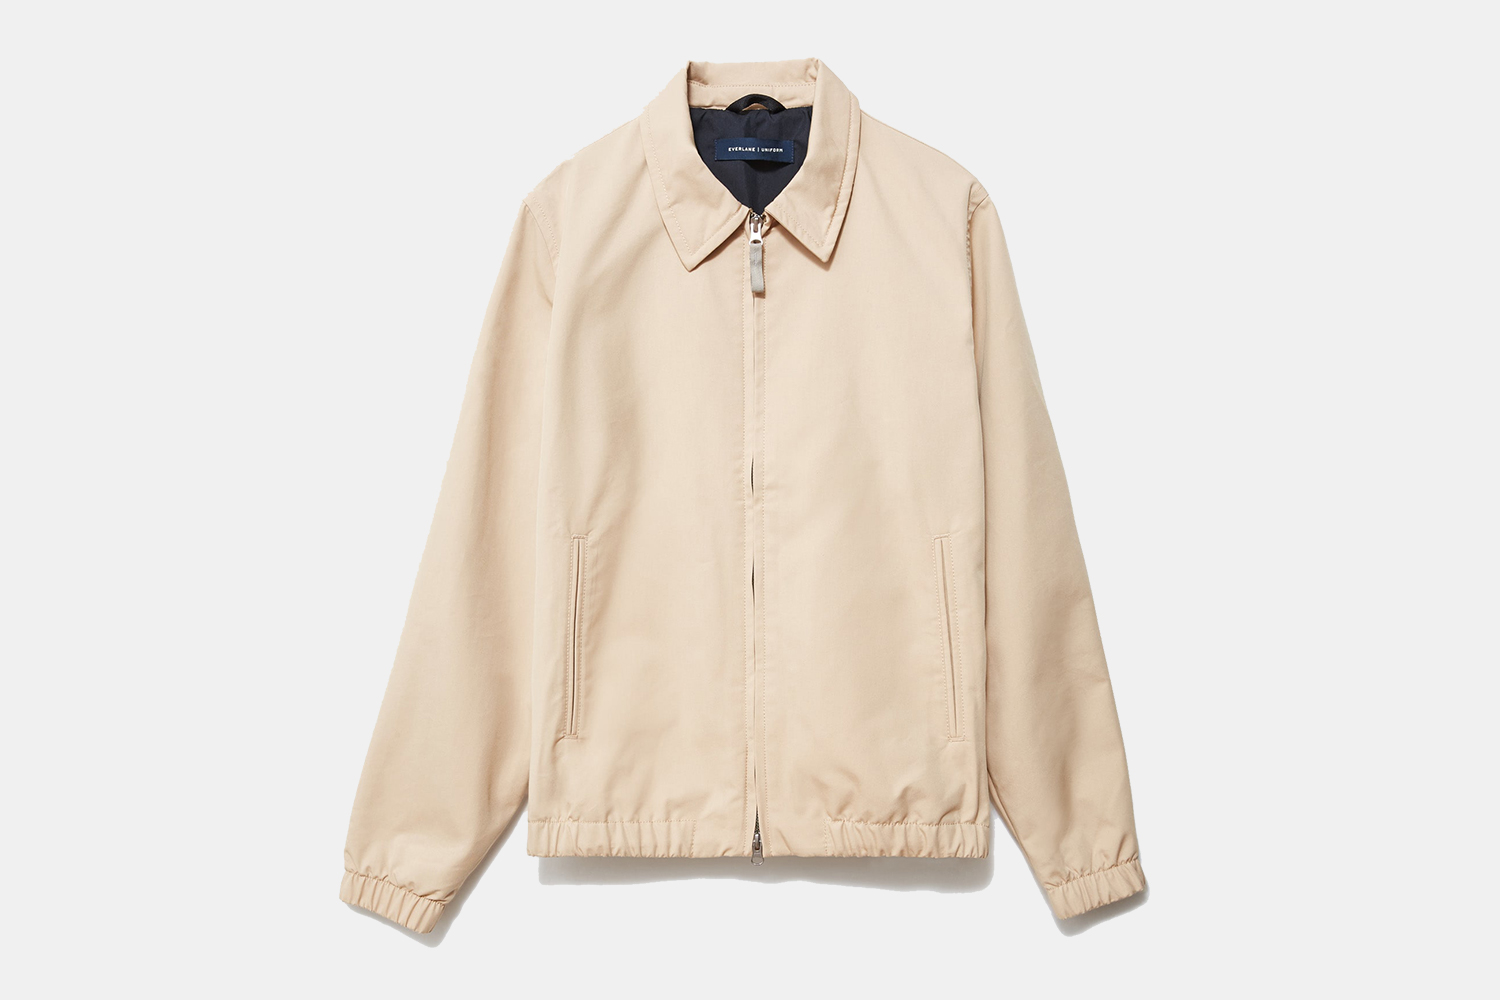 The Everyday Jacket from Everlane in khaki on a grey background